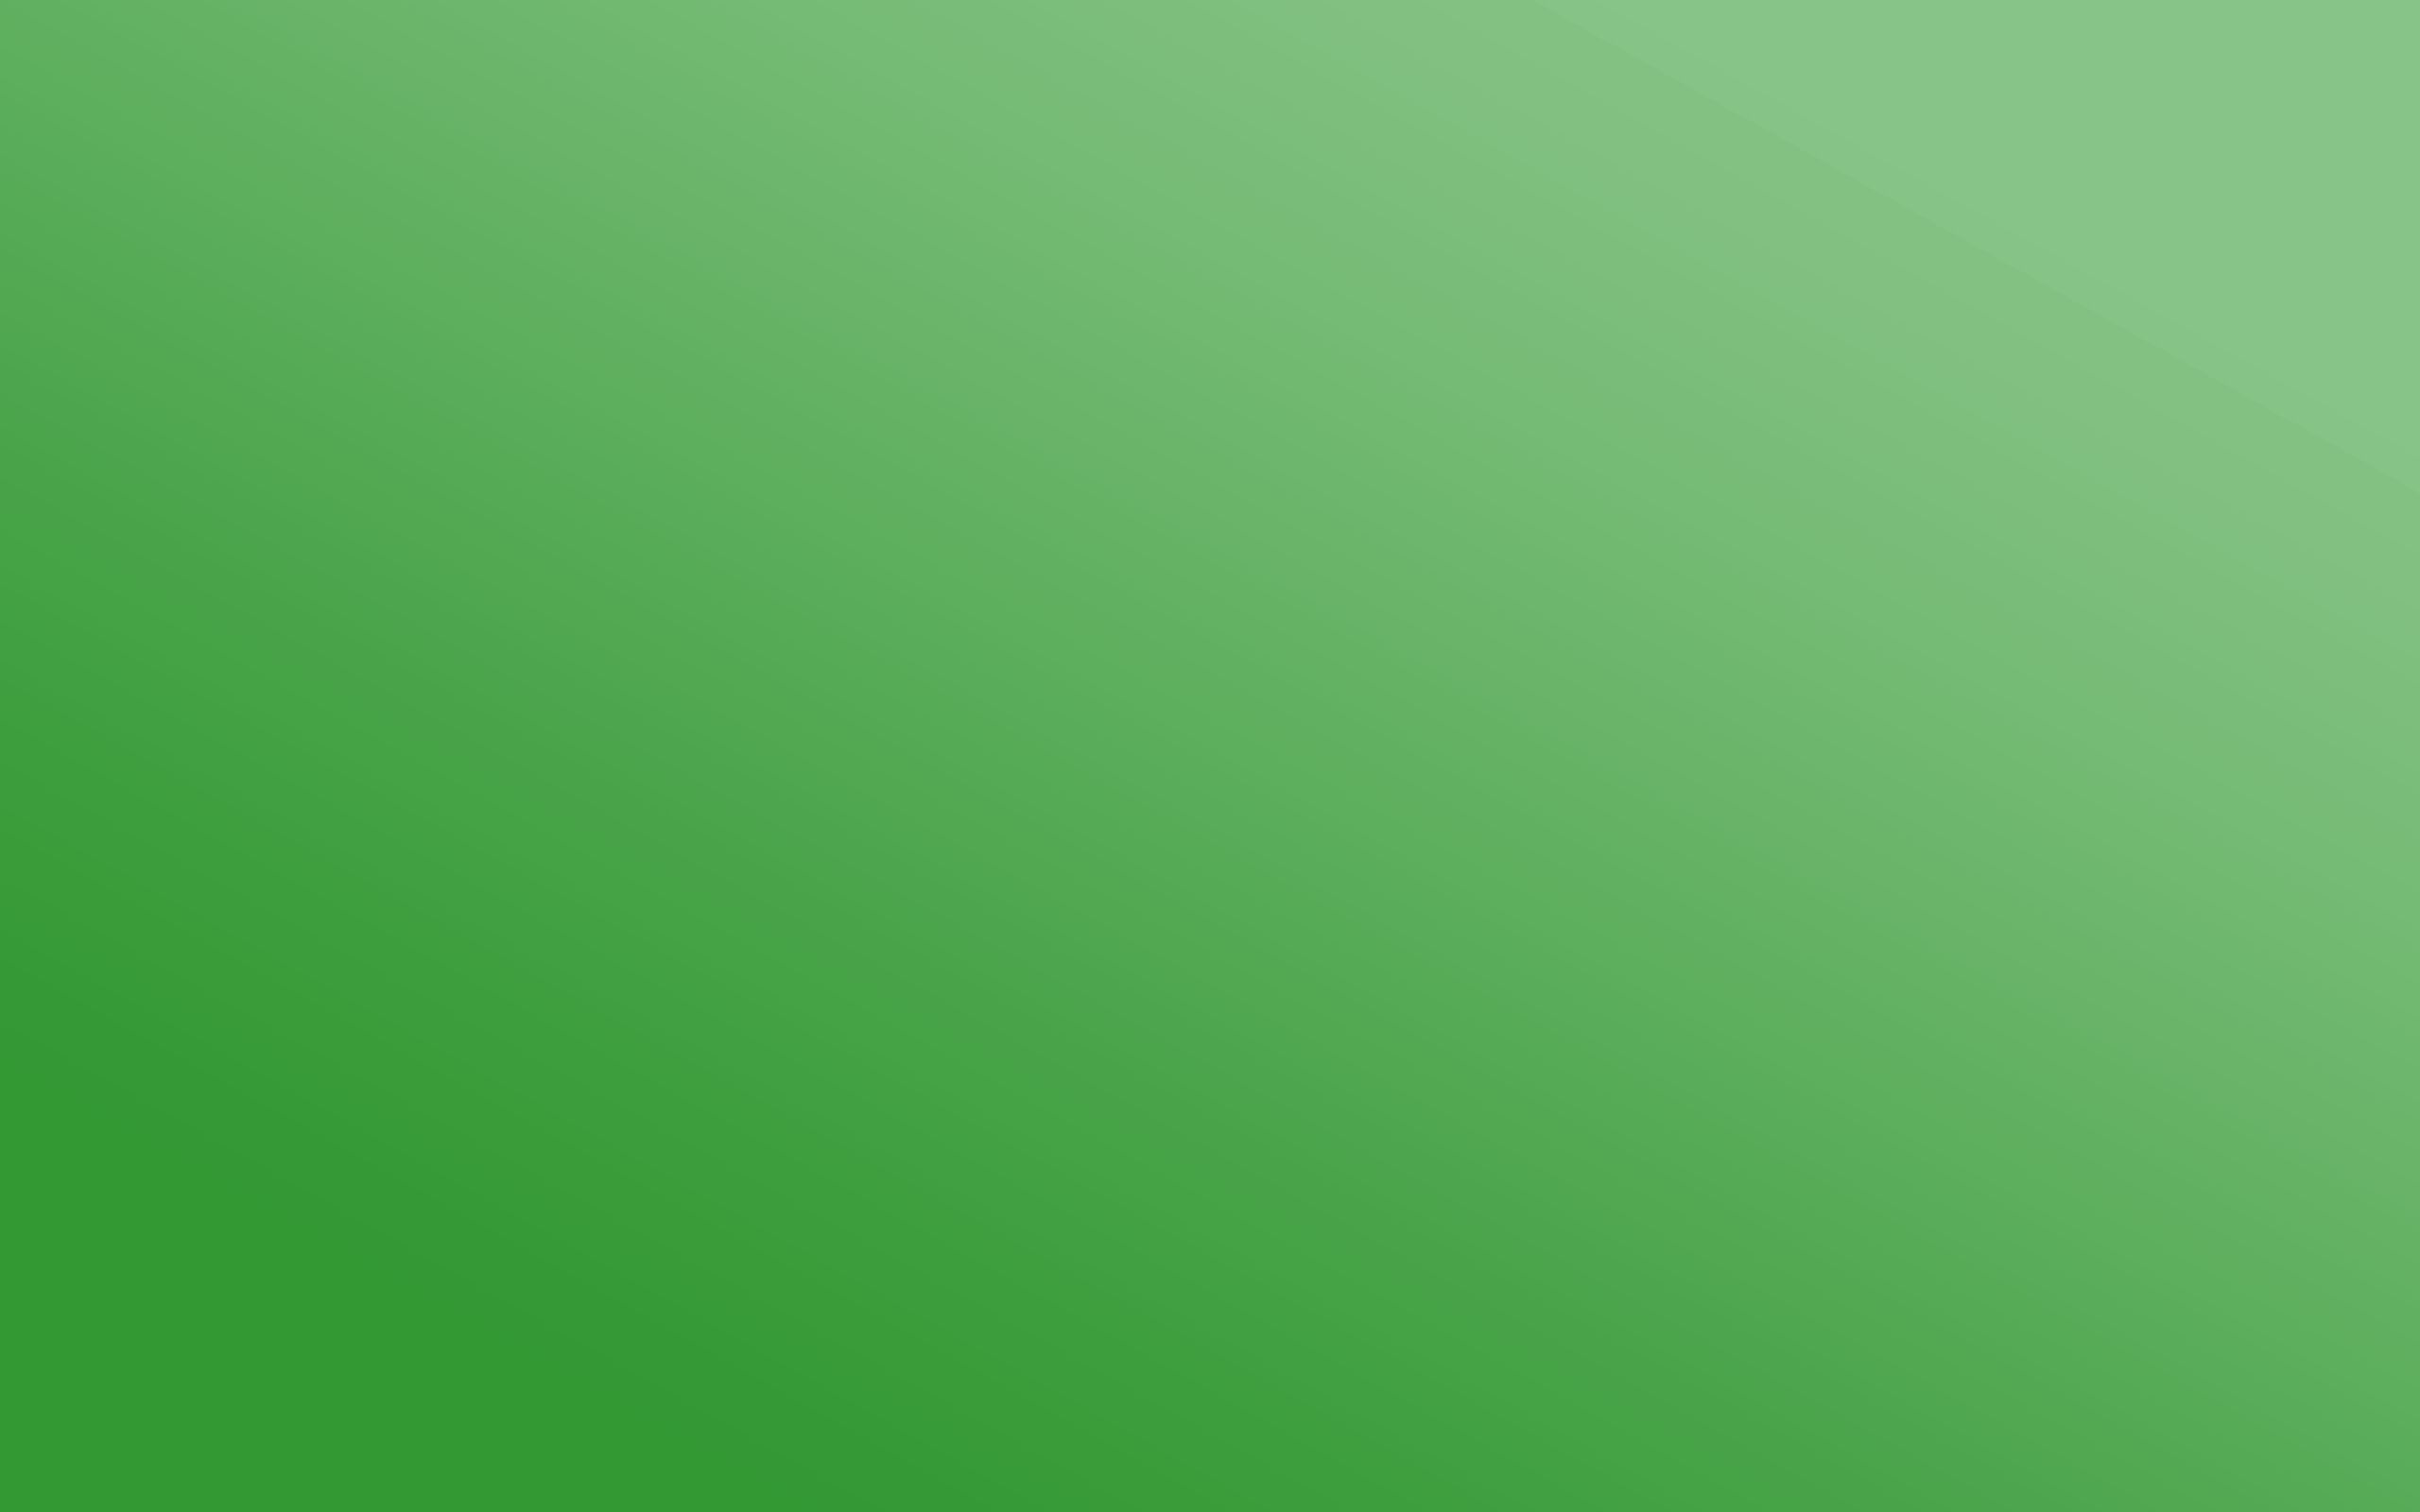 solid, light coloured, abstract, green, light, paint 1080p